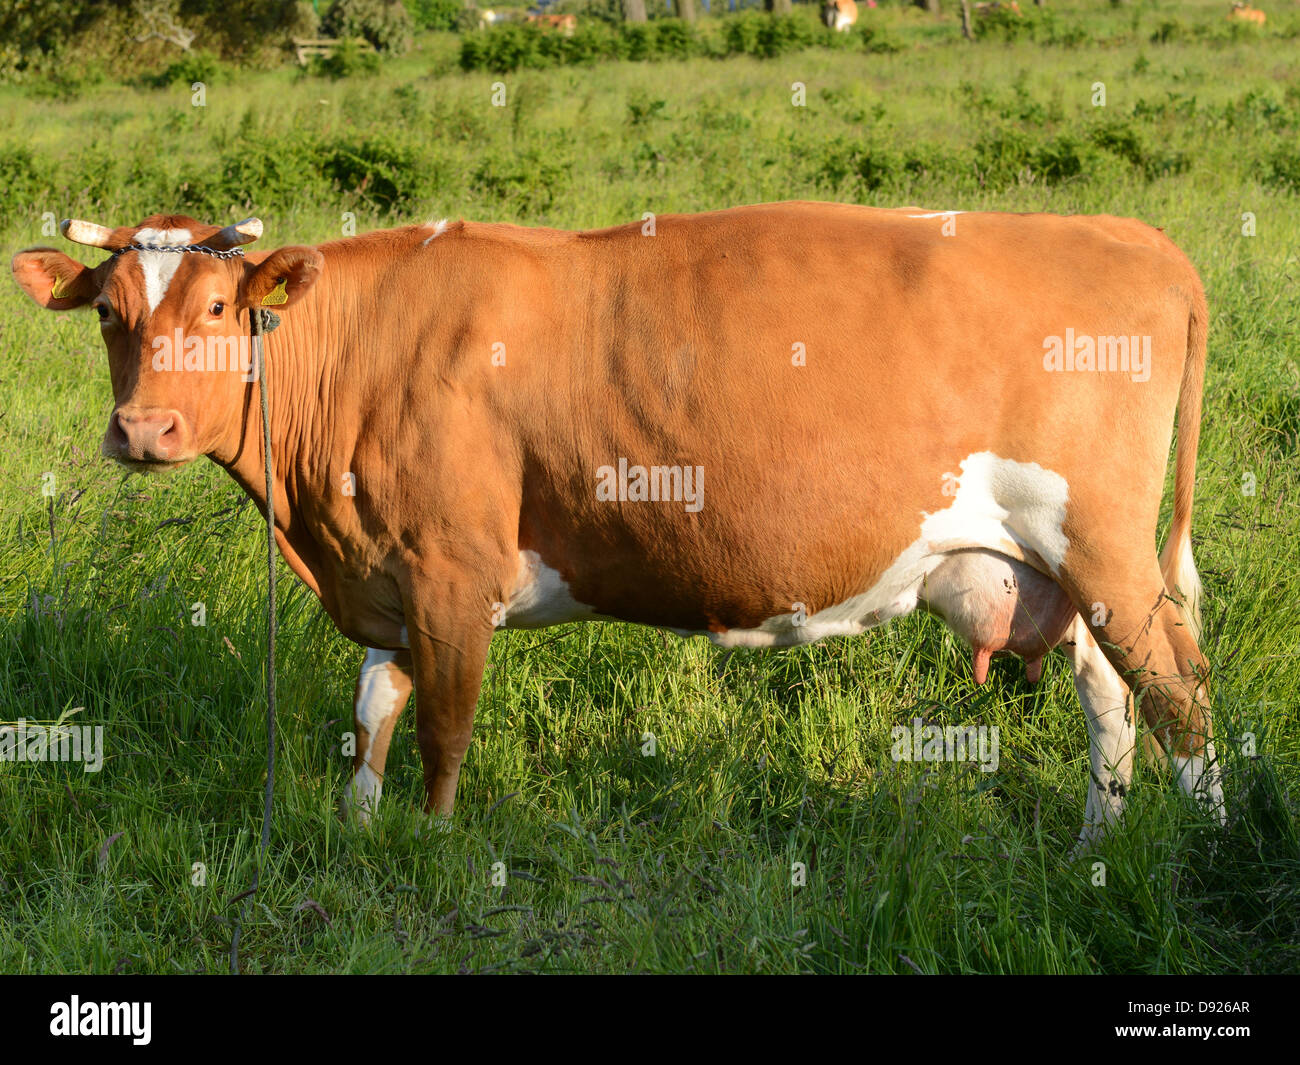 Guernsey Cattle High Resolution Stock Photography and Images - Alamy